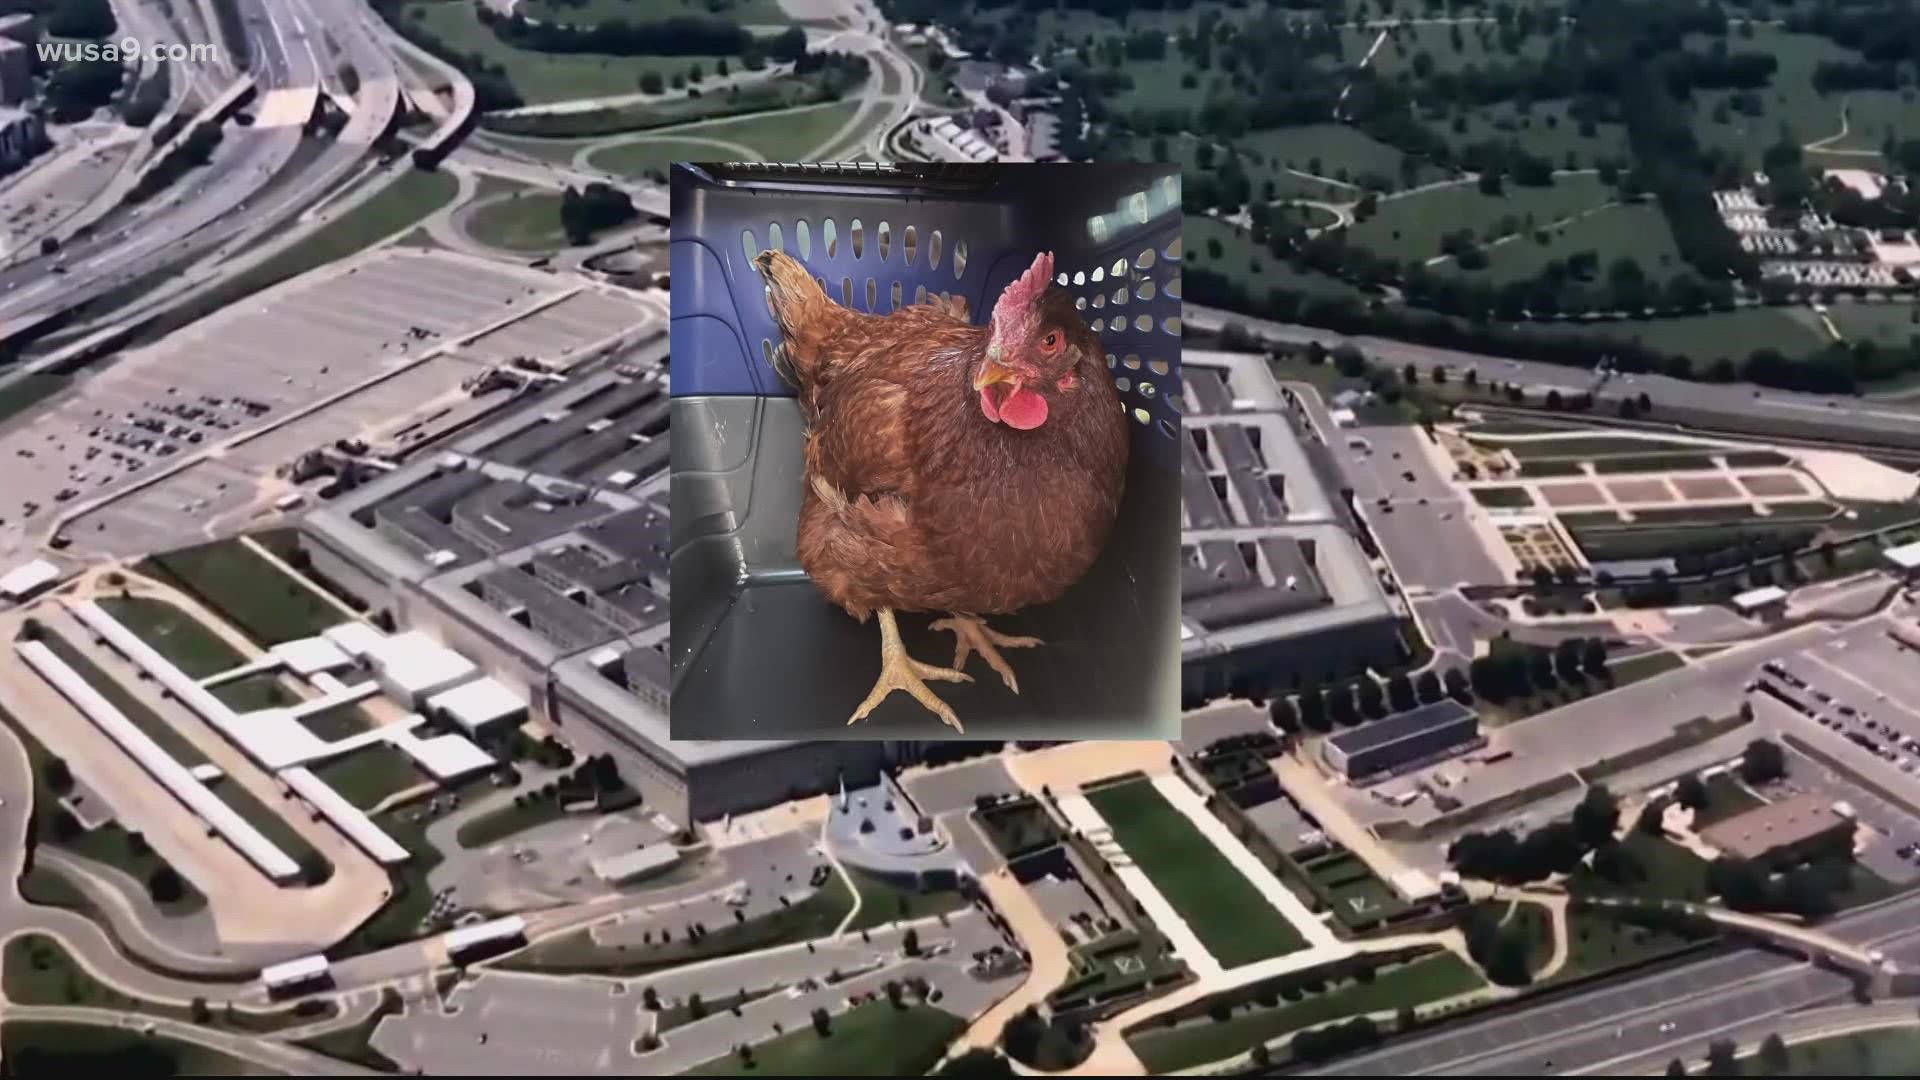 Animal control officers are looking for a home for a chicken they found wandering around the Pentagon early Monday morning.